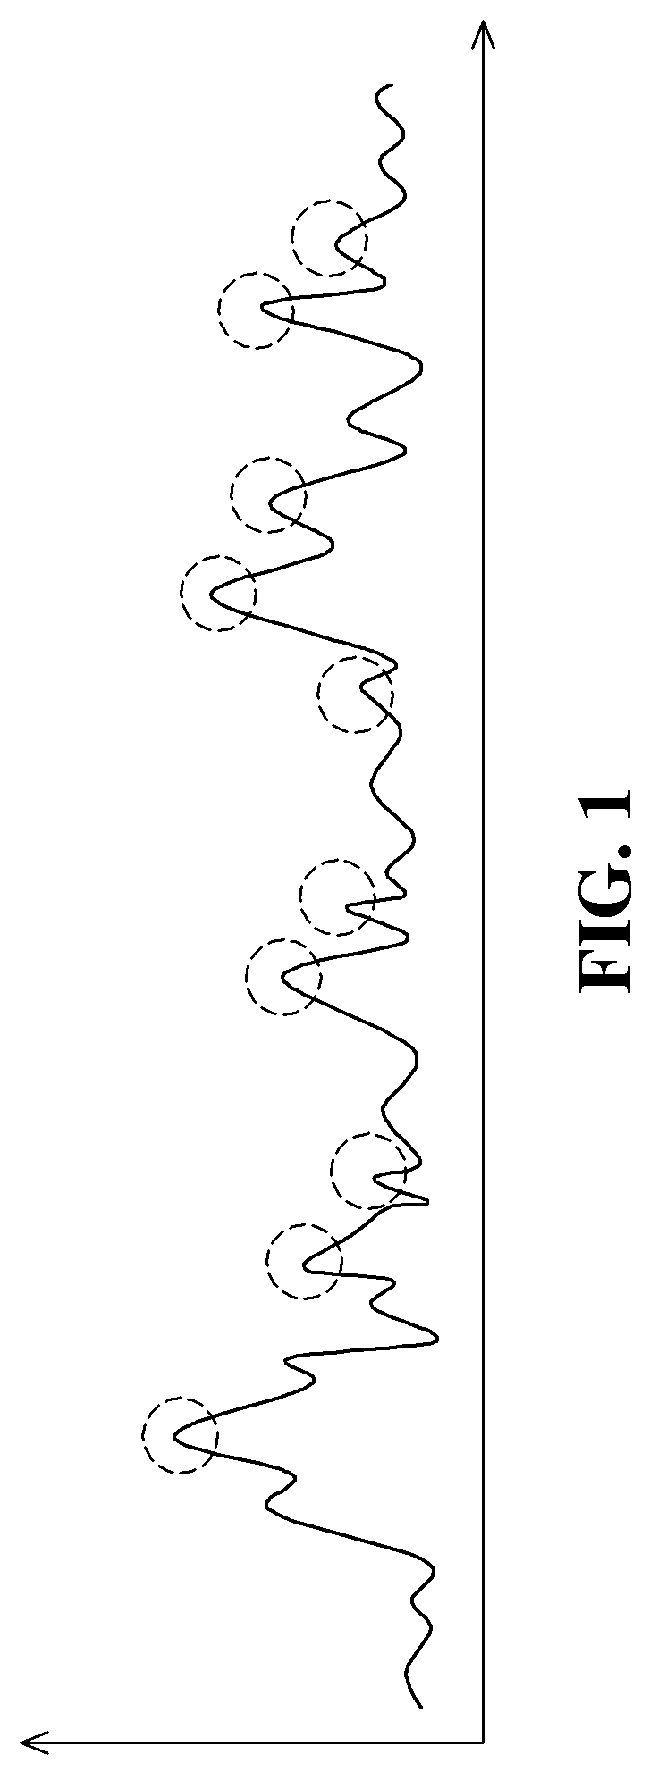 Method and device for counting people by using UWB radar